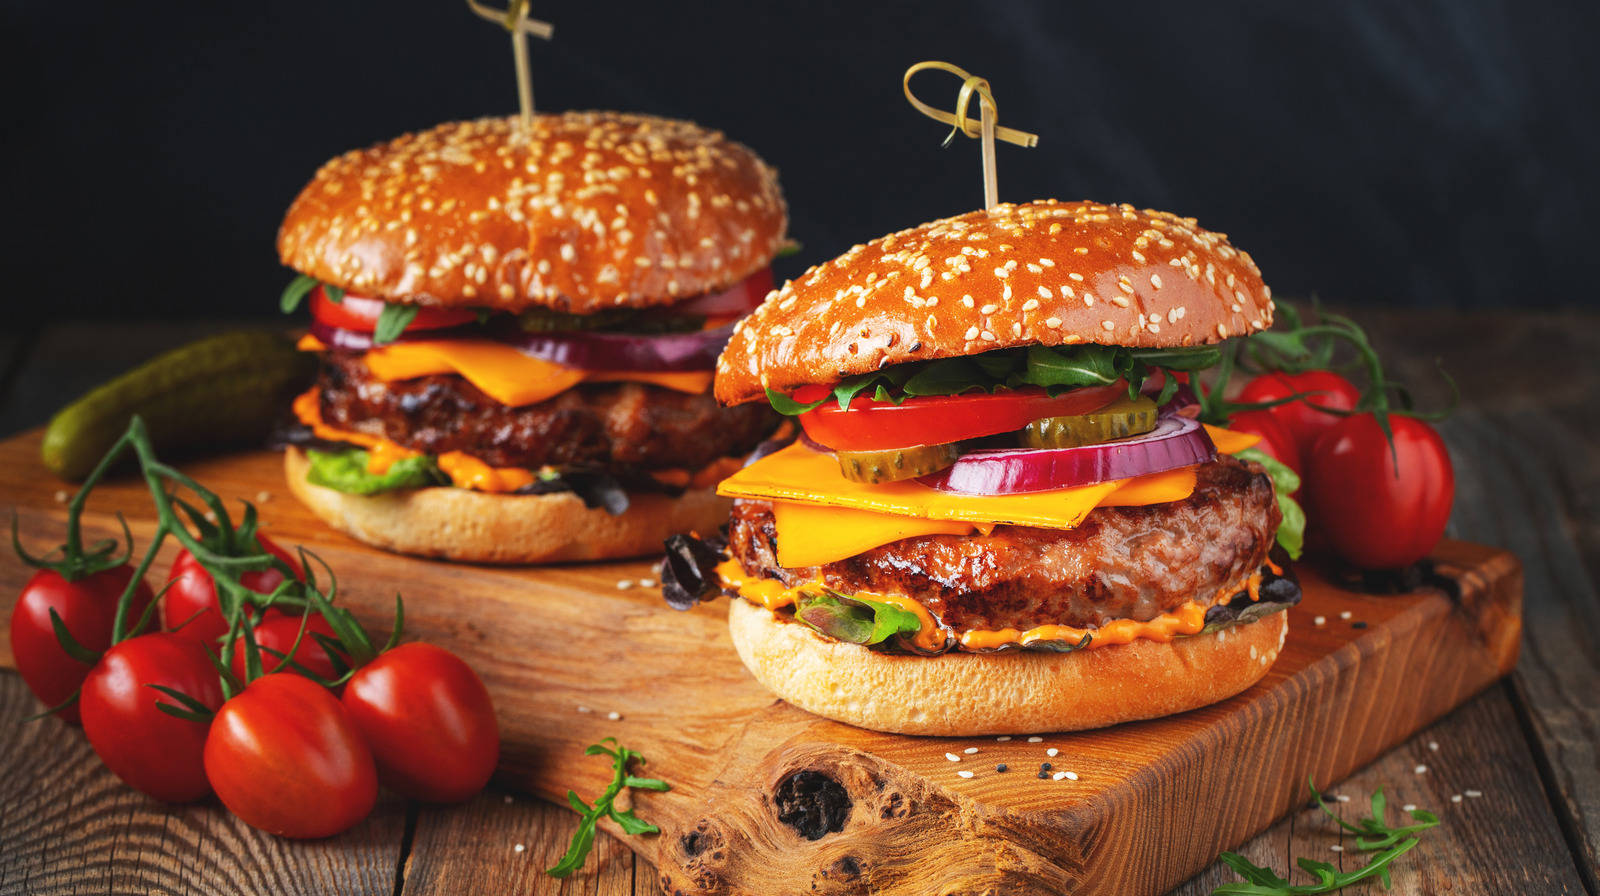 A Crave-worthy Burger King Whopper Sandwich Background